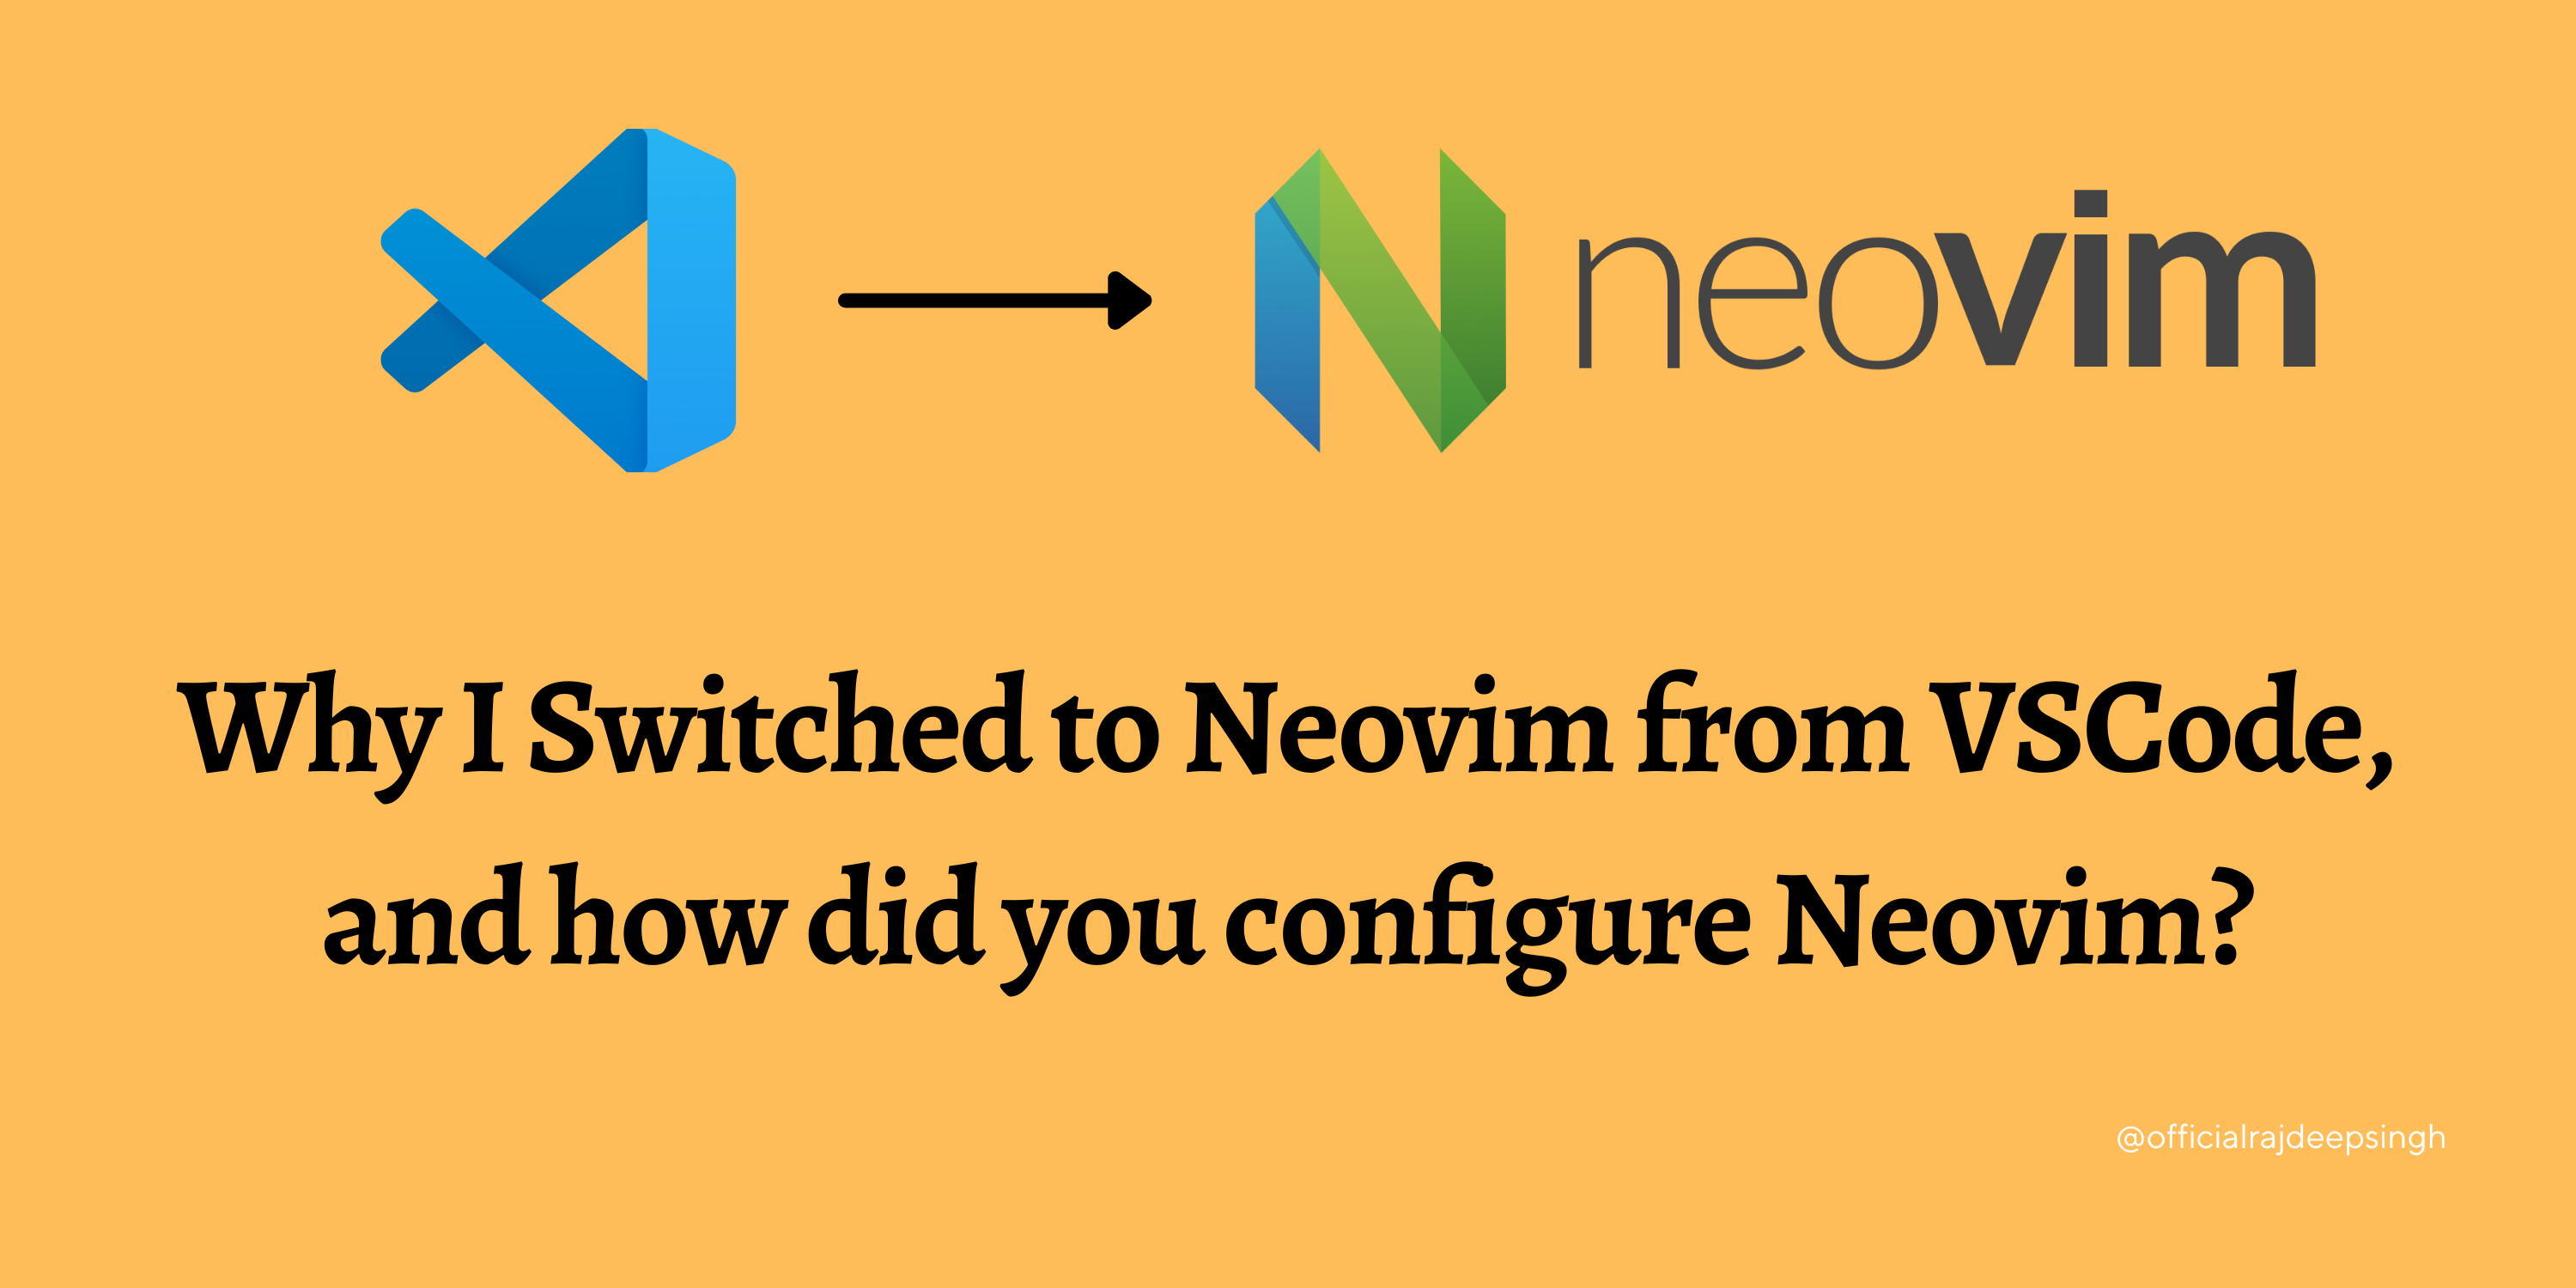 Why I Switched to Neovim from VSCode and how did you configure Neovim?